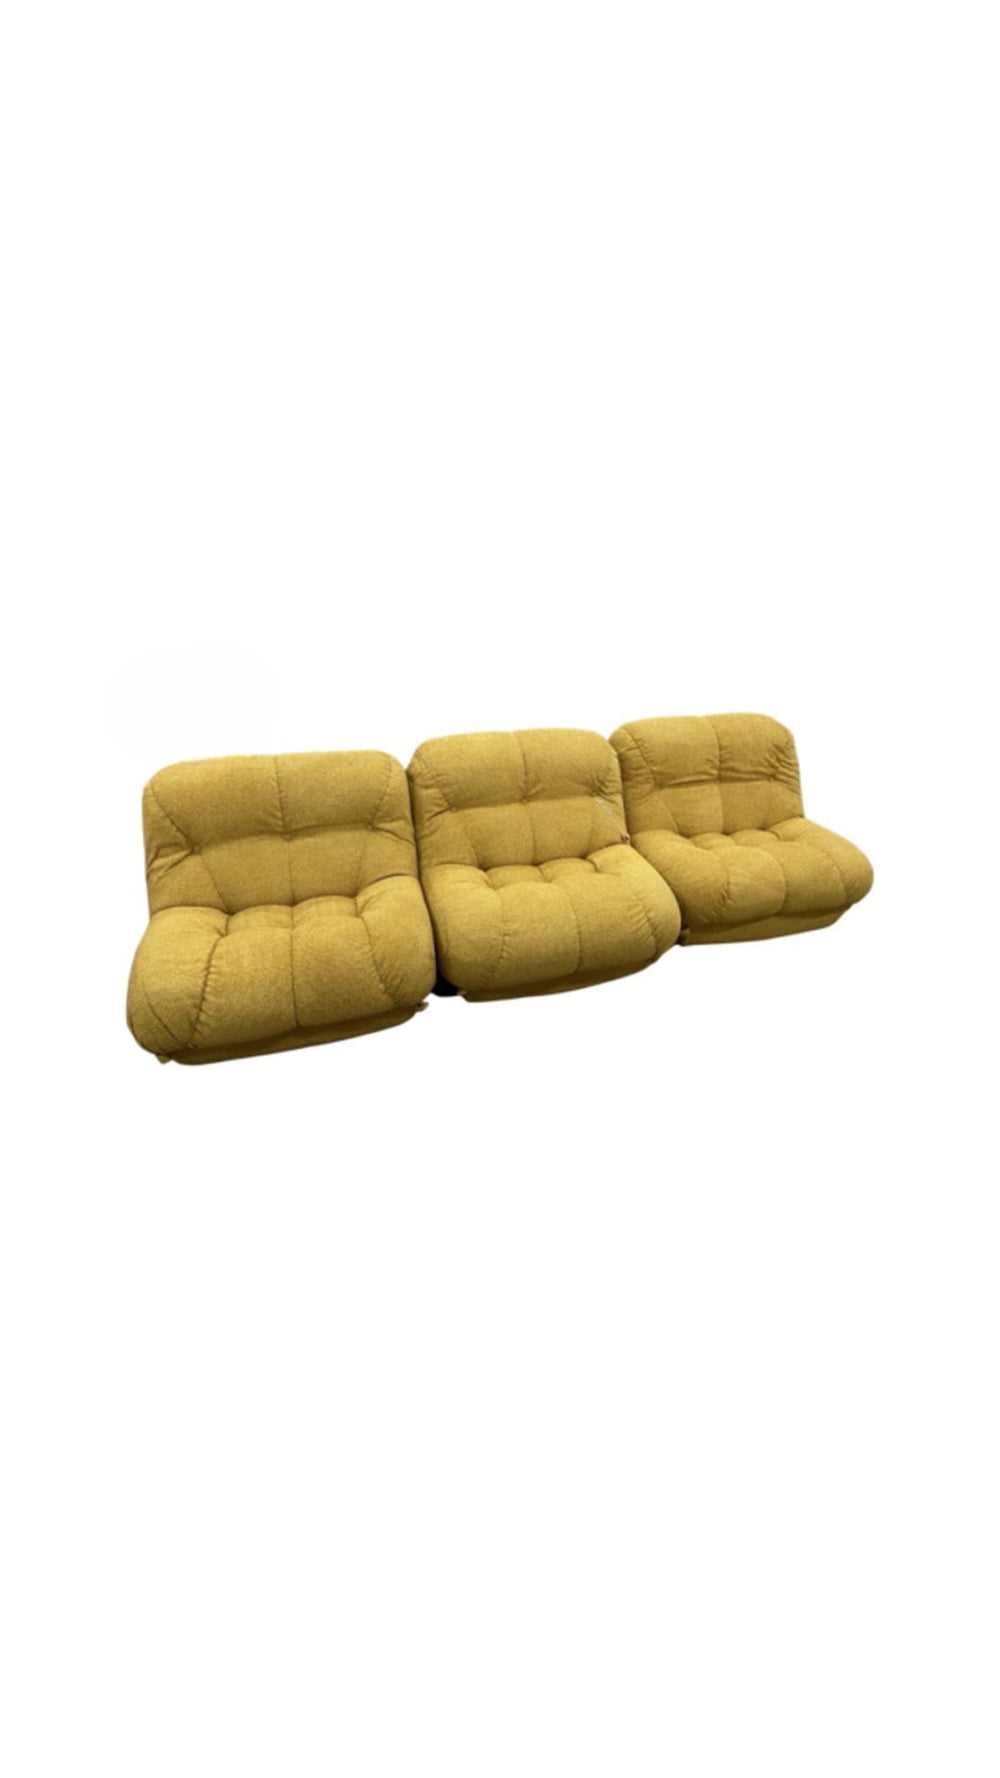 Mimo Padova model "Nuvocone" three piece sectional sofa in newly upholstered yellow fabric, Italy 1970s